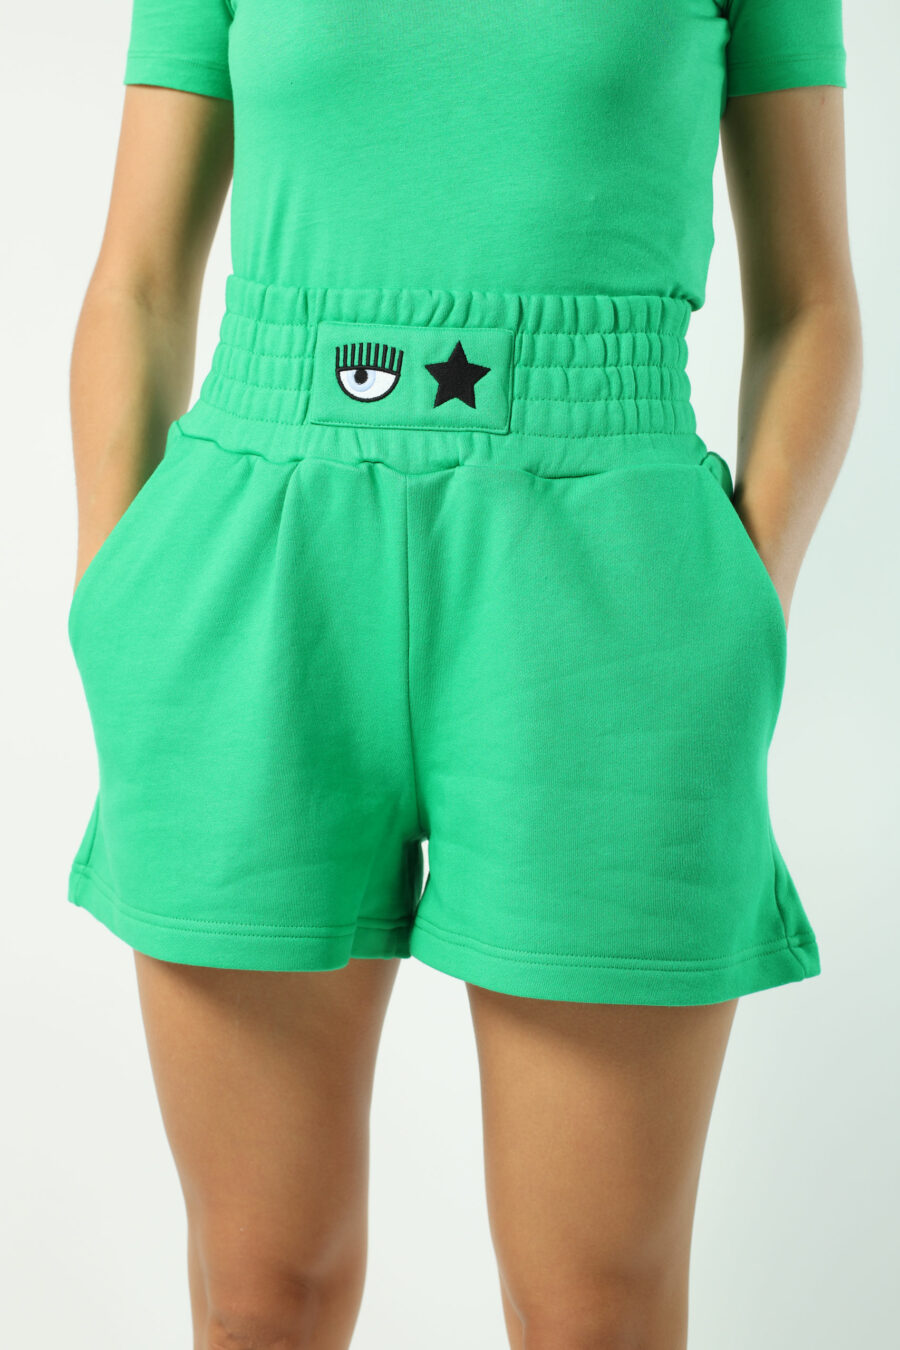 Tracksuit bottoms green shorts with eye and star logo - Photos 2579